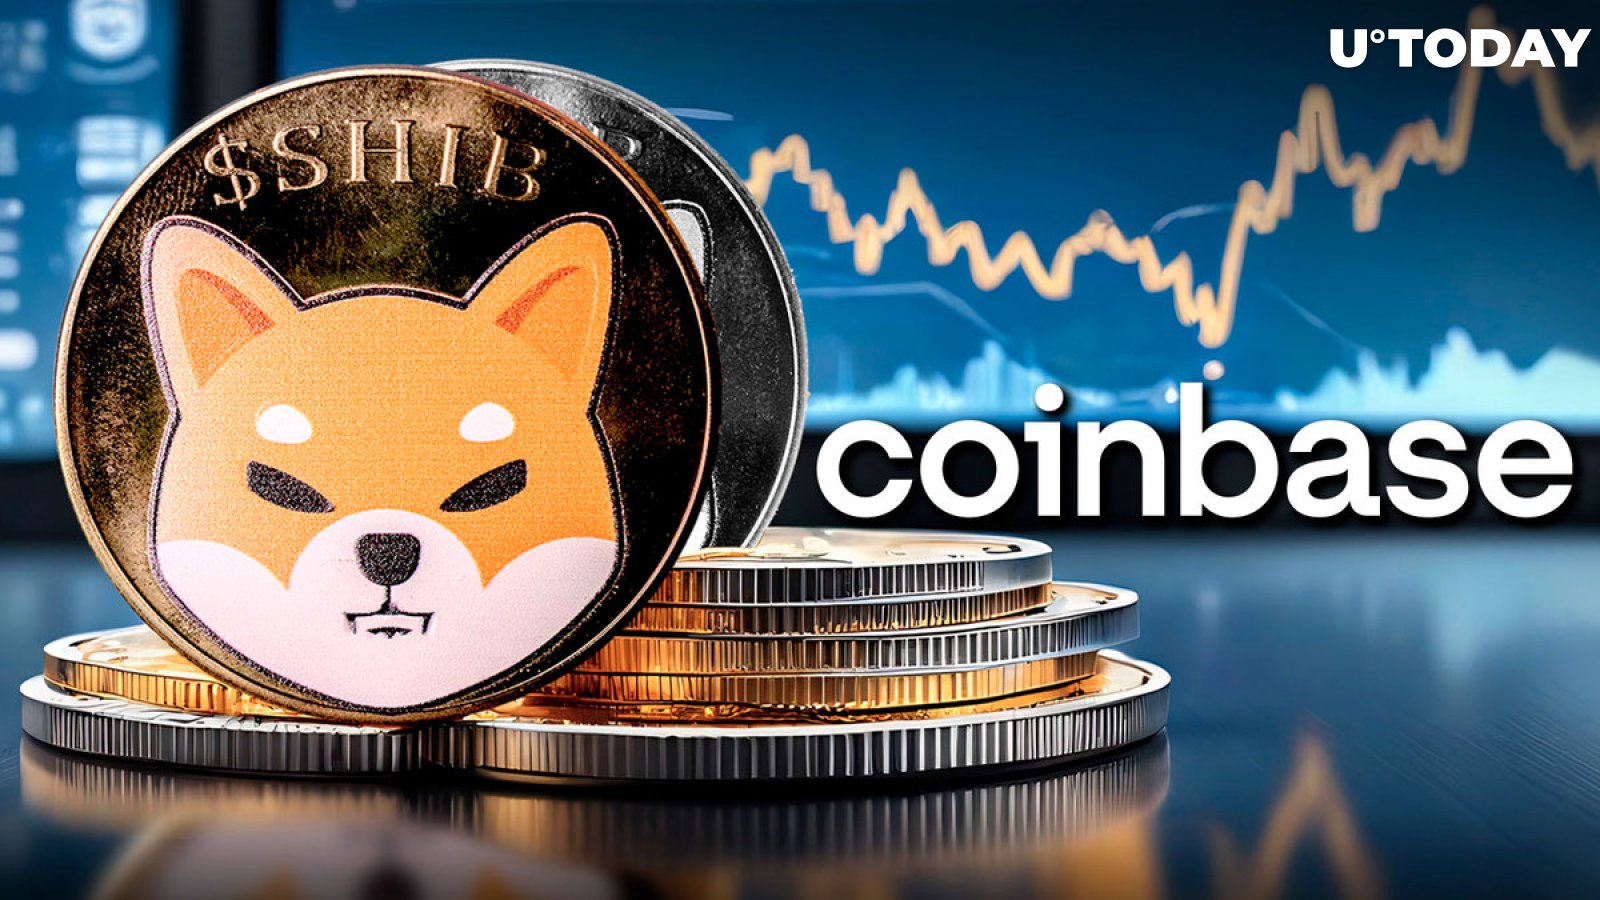 260 Billion Shiba Inu (SHIB) in 24 Hours From Coinbase: What's Happening?